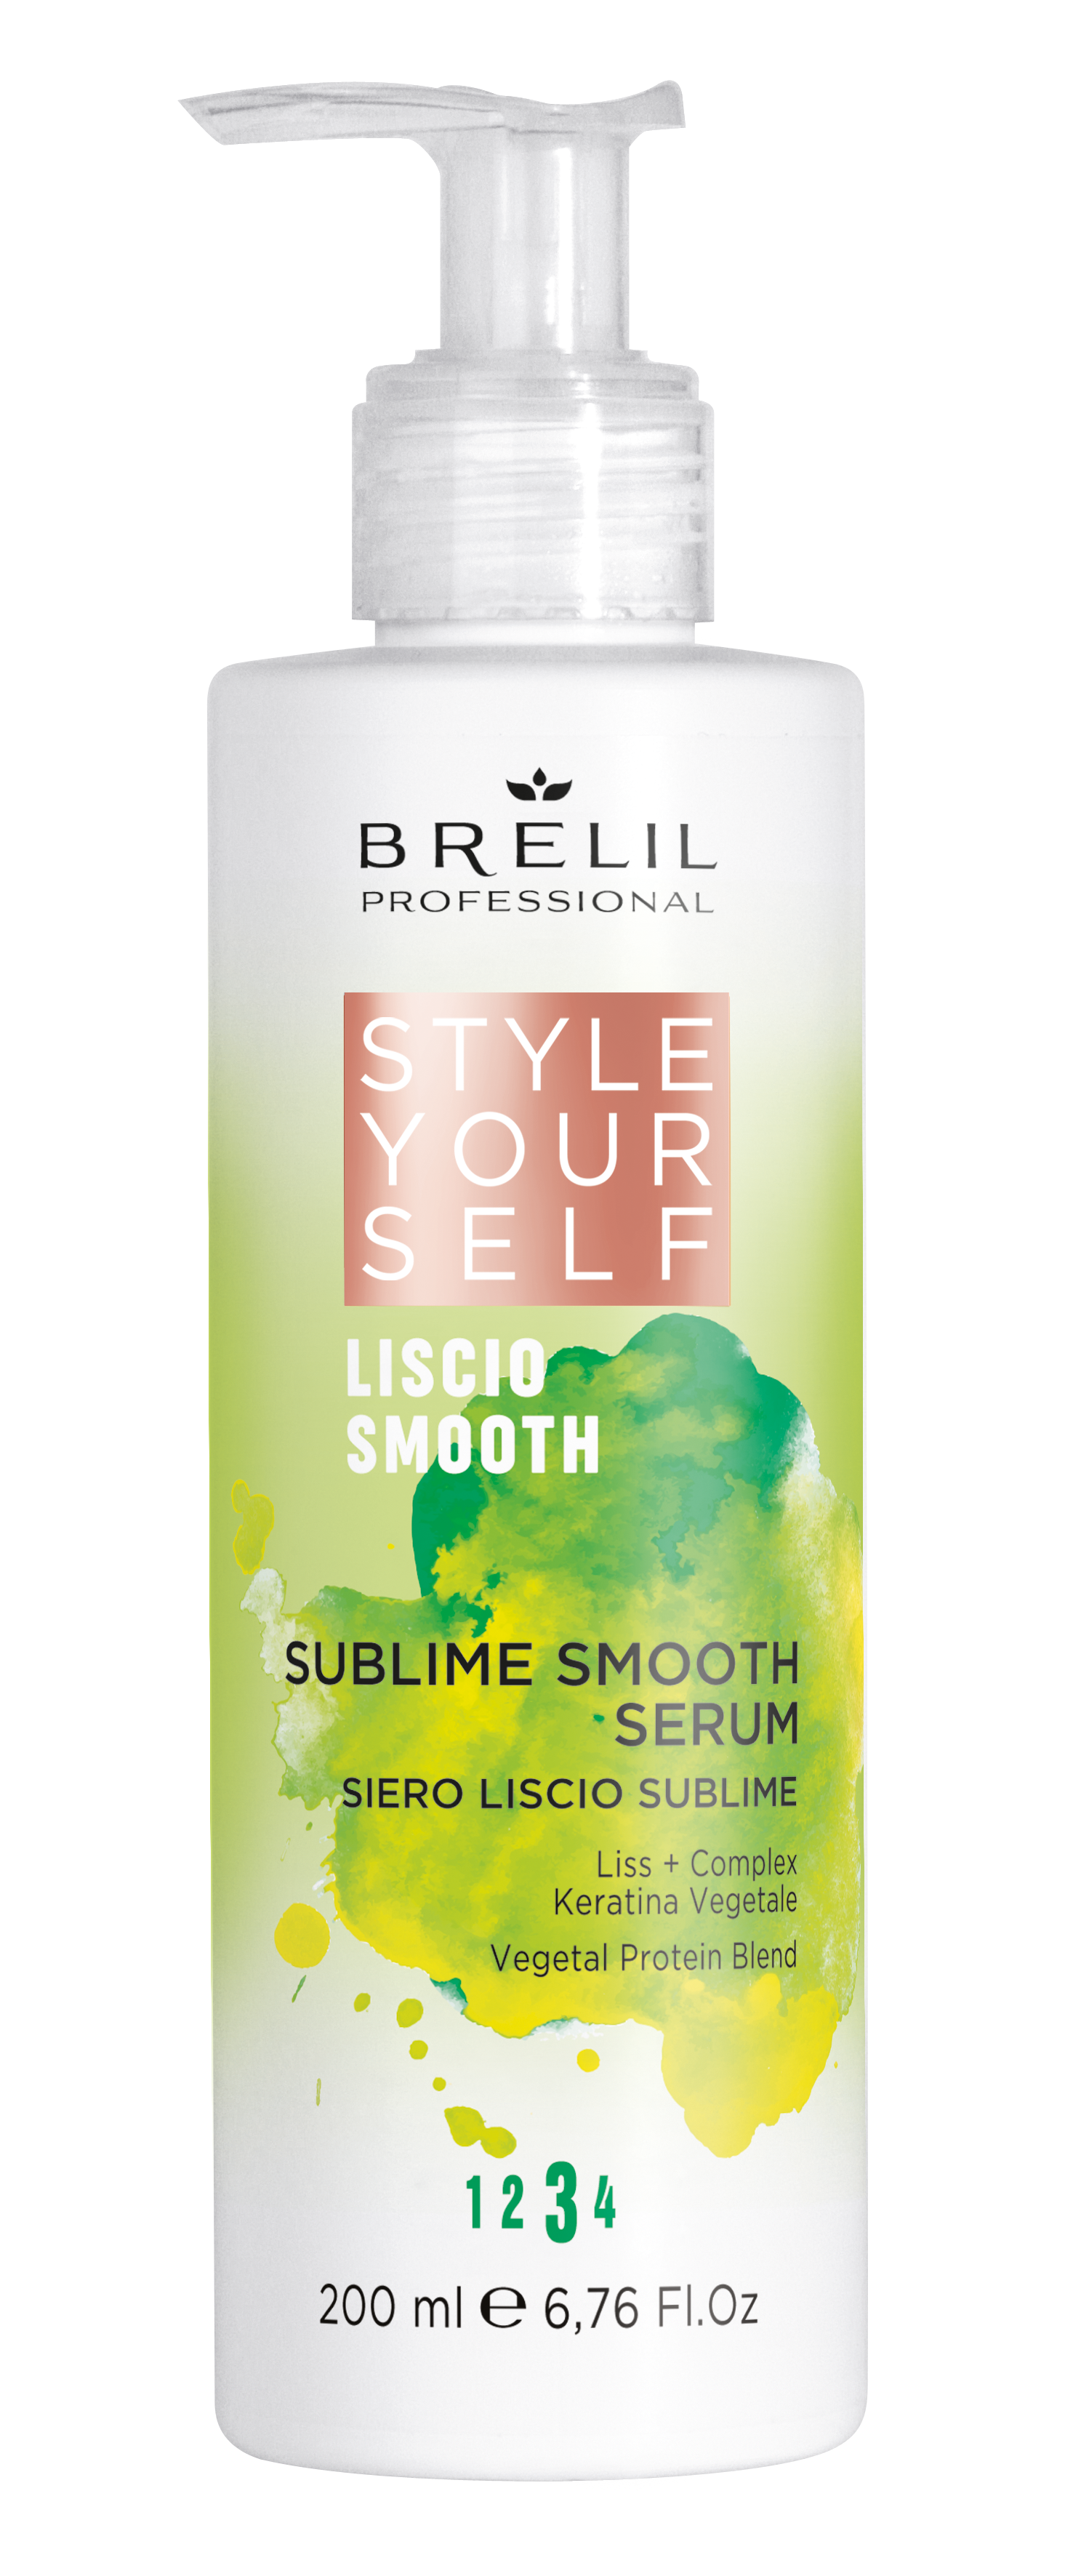 STYLE YOURSELF SUBLIME SMOOTH SERUM